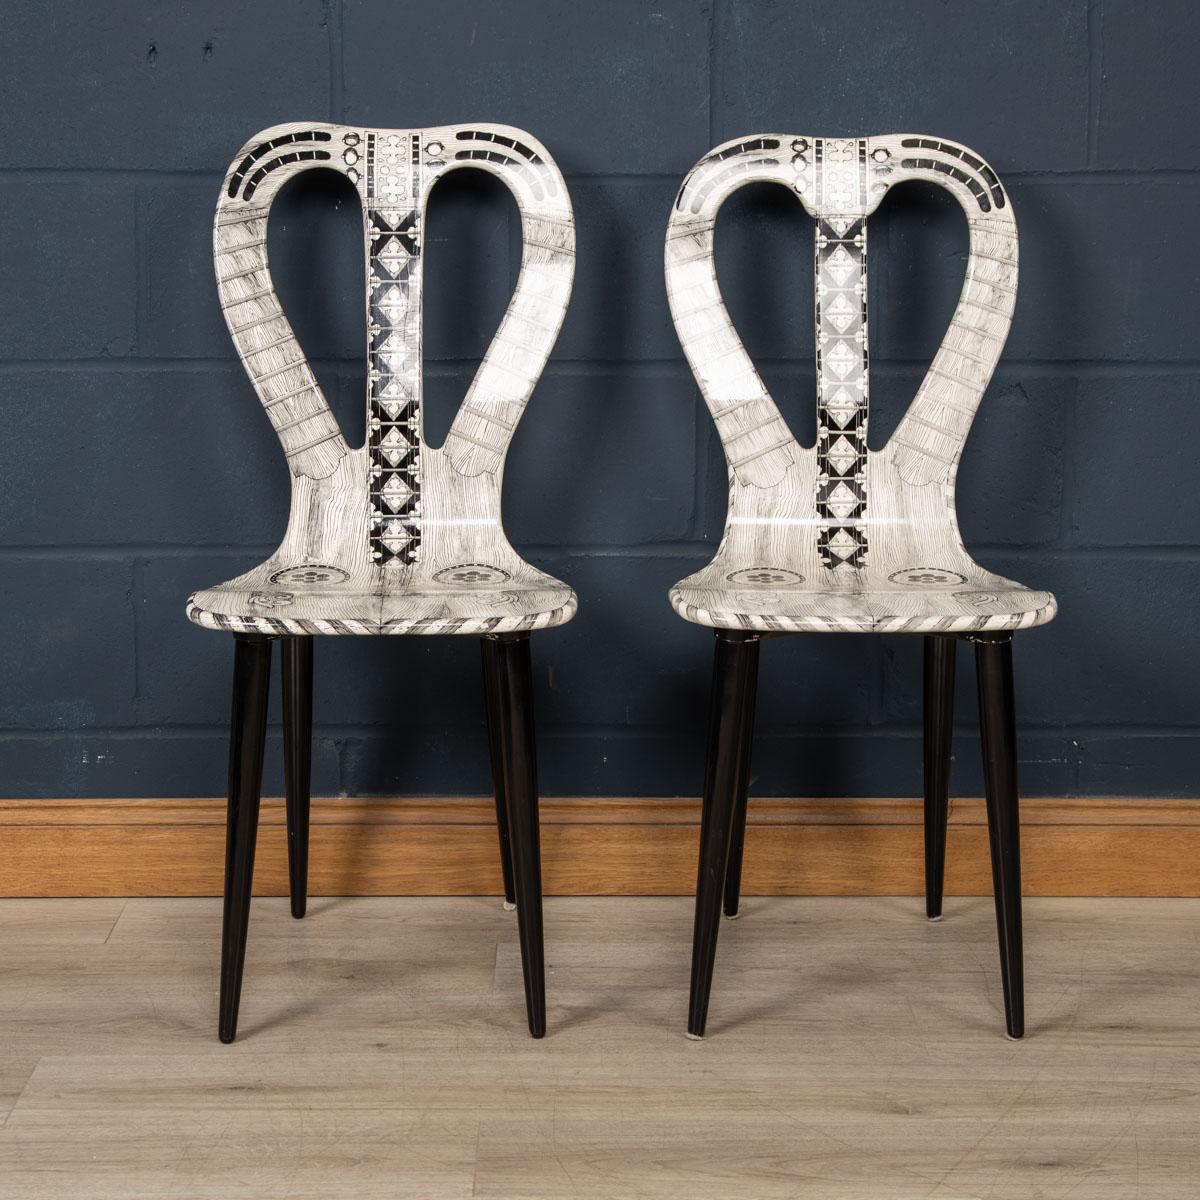 A very rare pair of chairs by Fornasetti Studios made in Italy towards the latter end of the 20th century. These chairs are handcrafted using the original artisan techniques. They are silk-screened by hand, hand painted and covered with a smooth